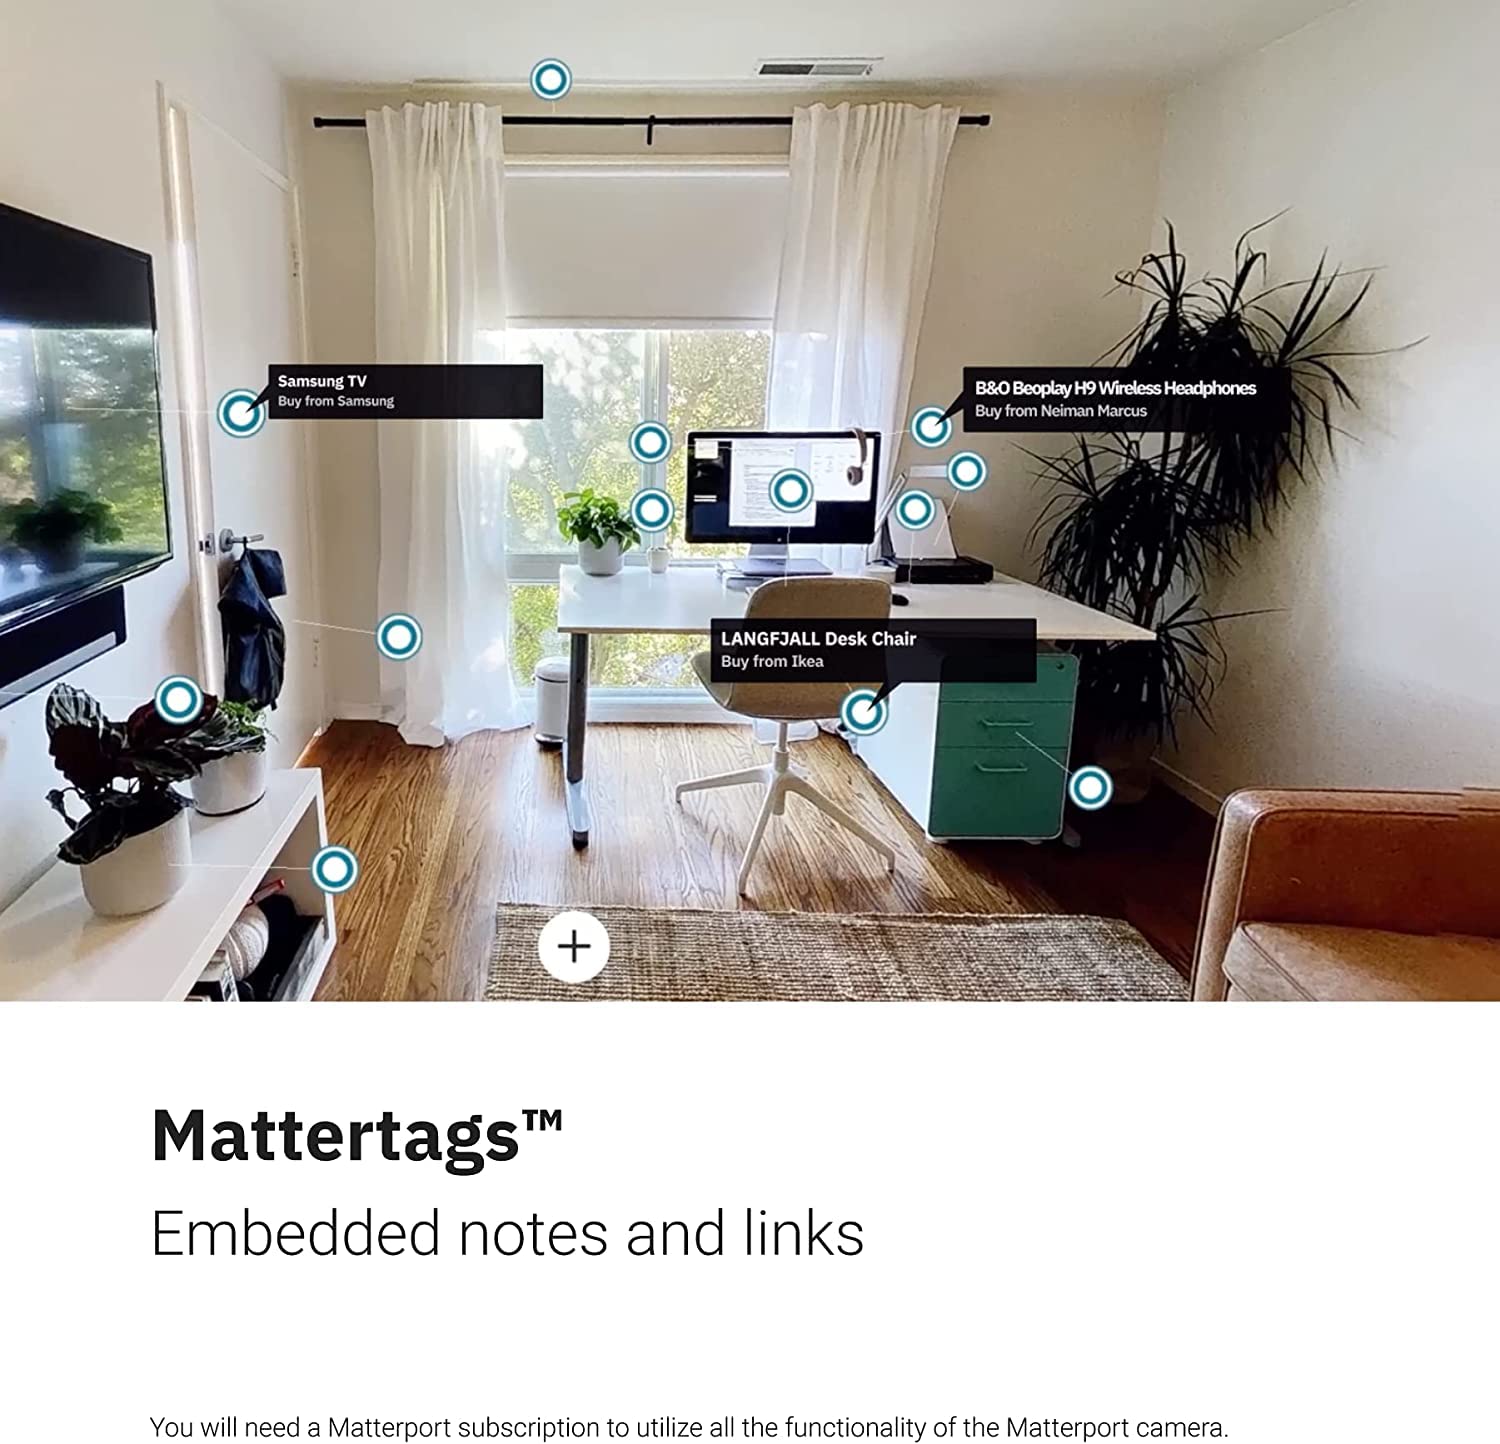 Matterport Pro2 3D Camera Professional Kit - High Precision for Virtual Tours, 3D Mapping, & Digital Surveys with 360 Views and 4K Photography with Trusted Accuracy and Speed